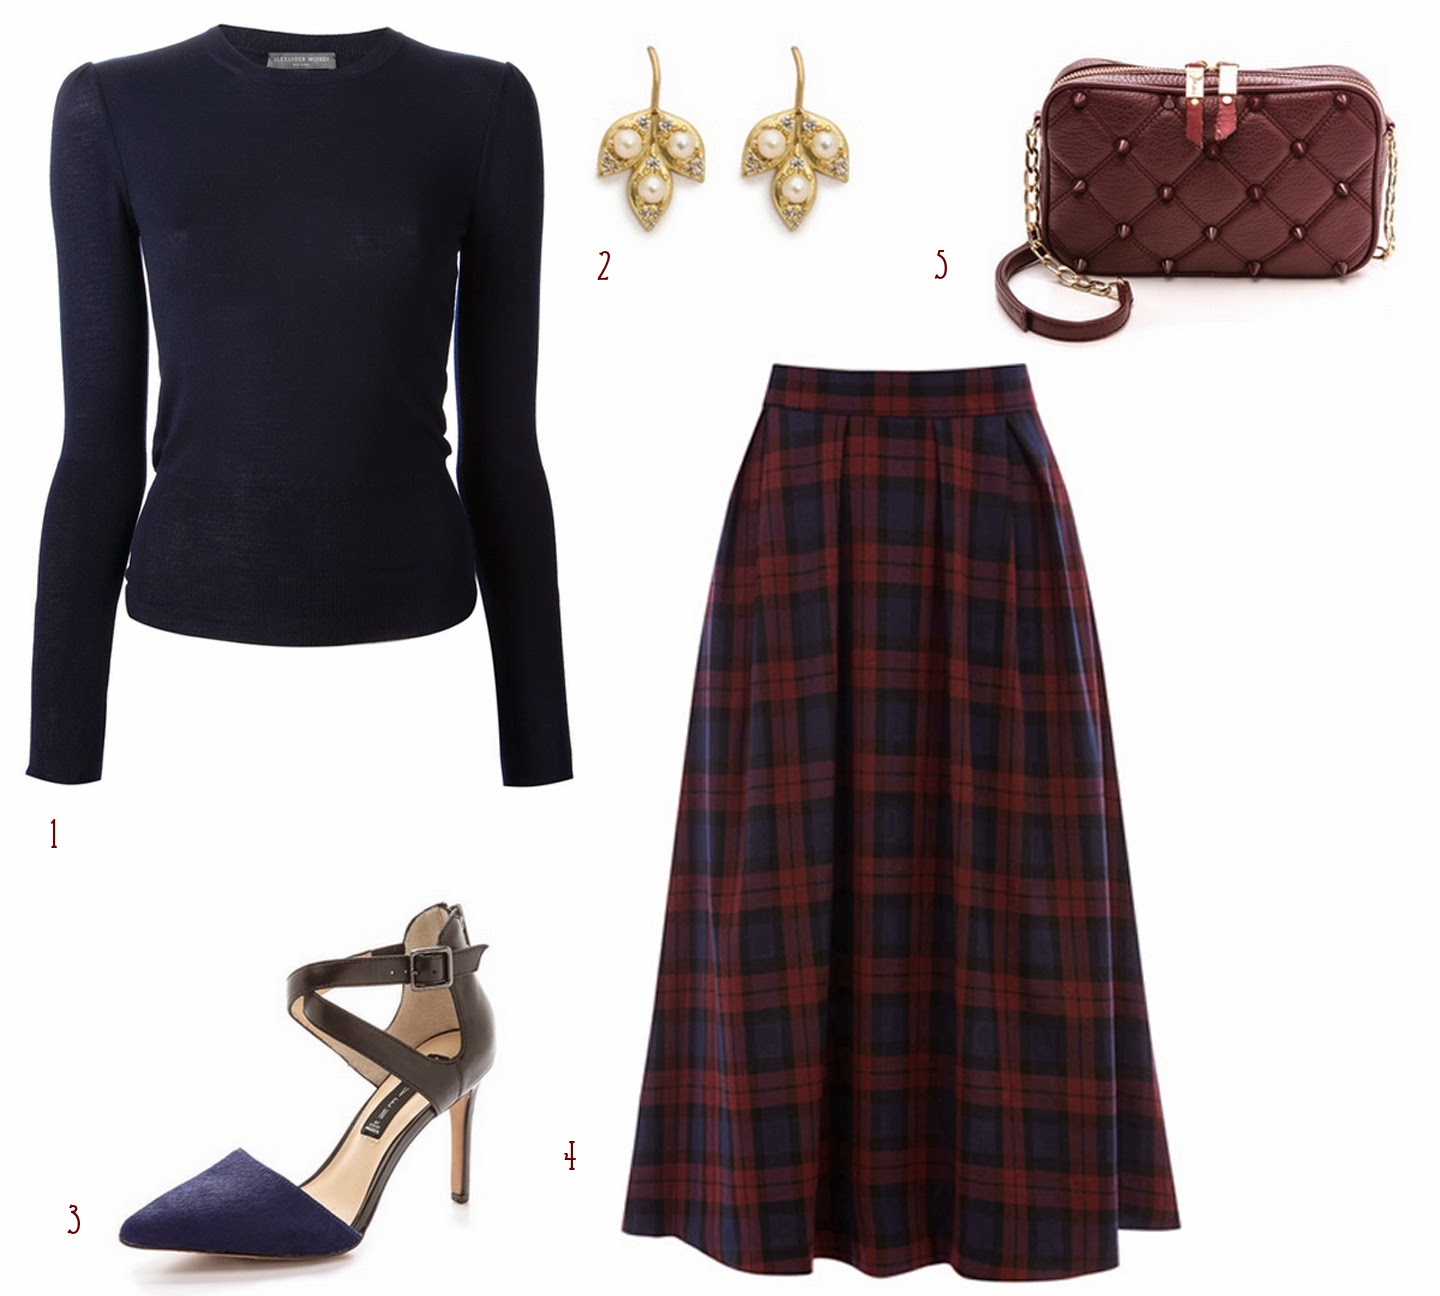 My Never Ending Daydream: Midi Skirt and Sweater